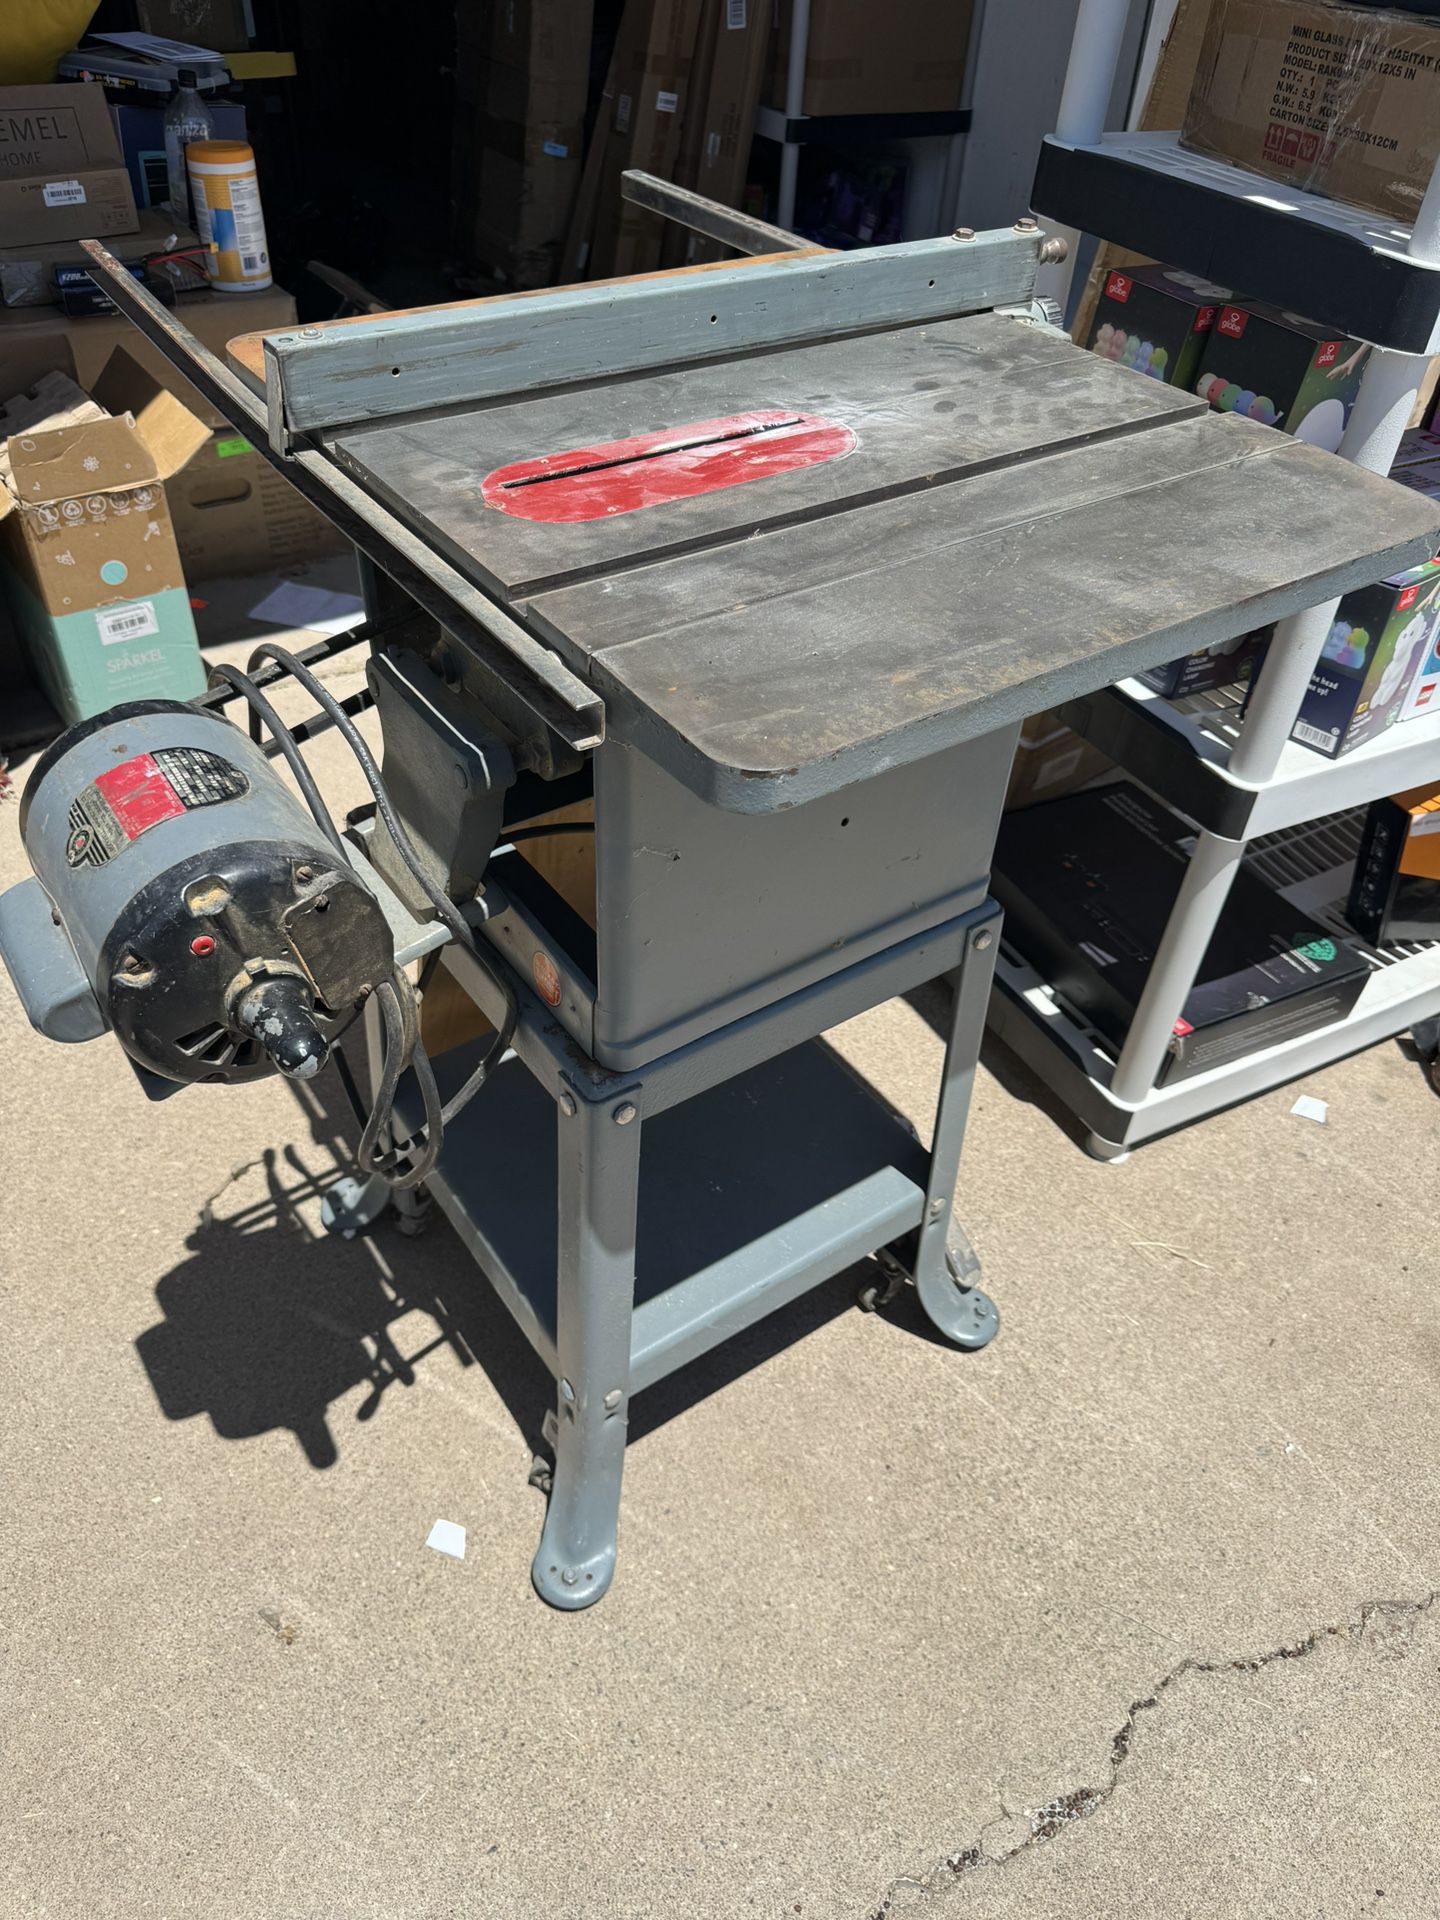 Table Saw - Vintage - Rockwell/Delta 